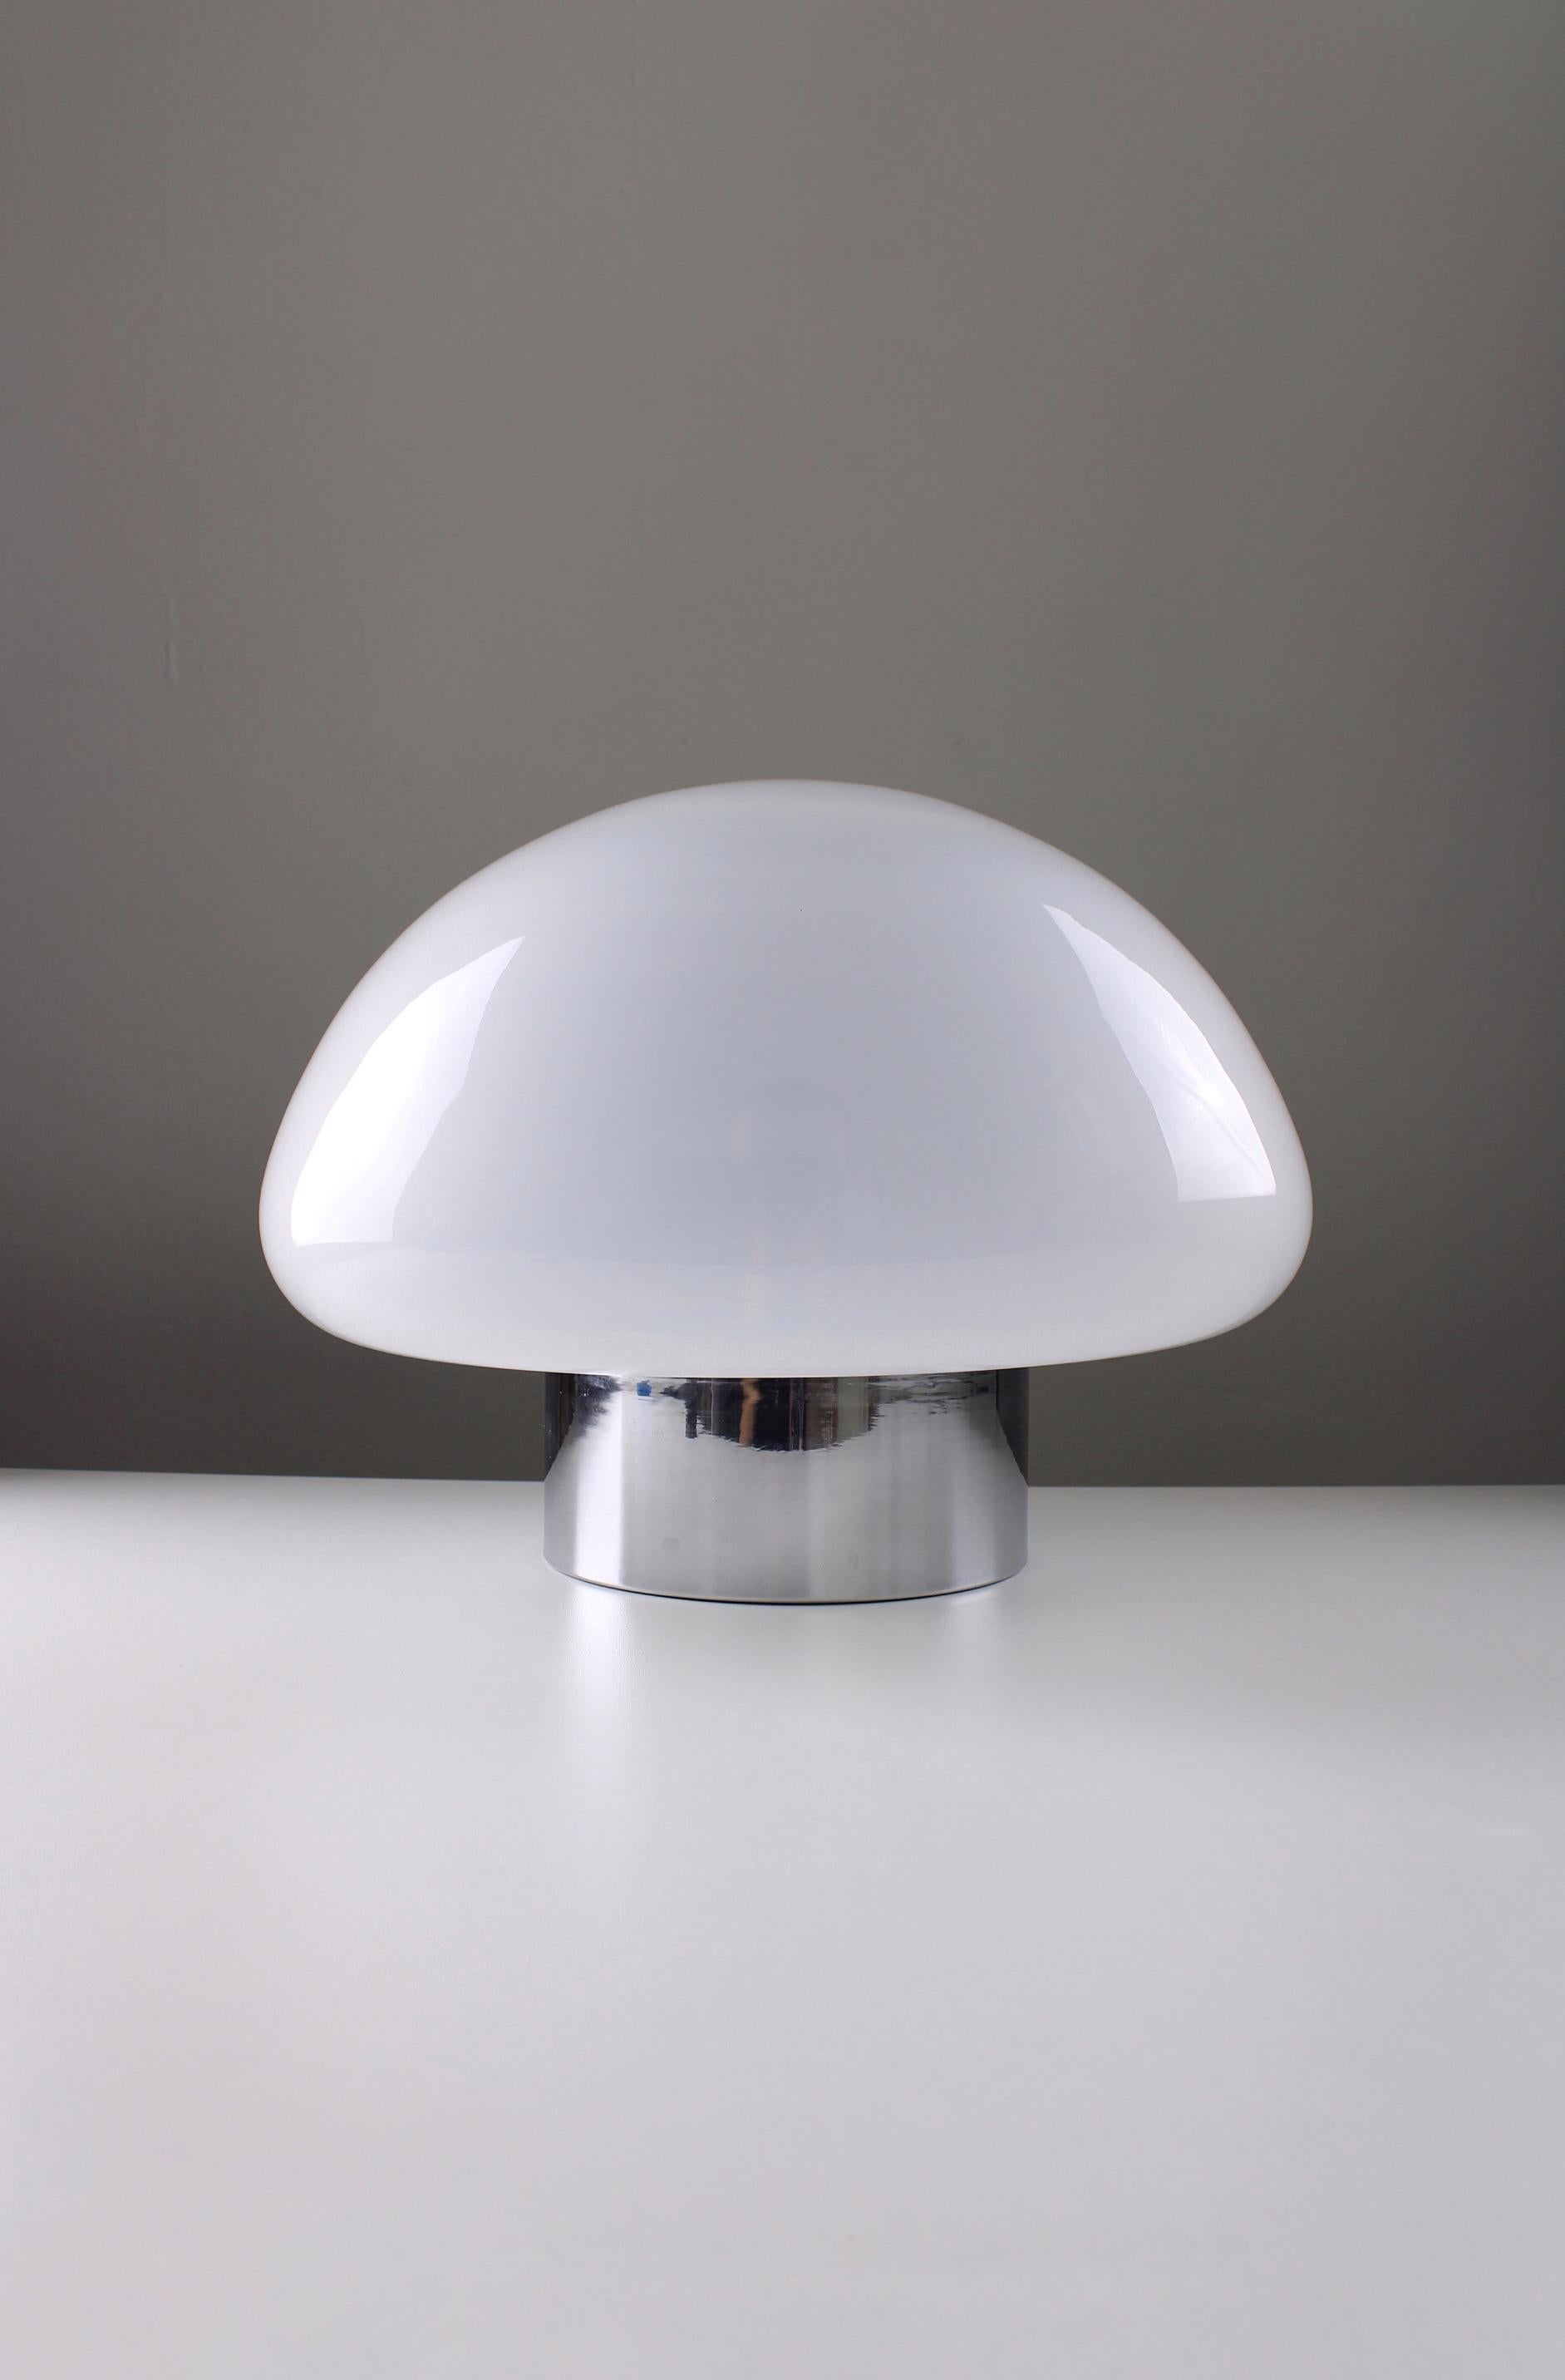 Rare table lamp made by a small and unknown lighting company named Lamperti from Robbiate (Como). This lamp was produced circa 1976. Straightforward mushroom design with chrome-plated metal and a large soft-tone glass shade. On the bottom is a